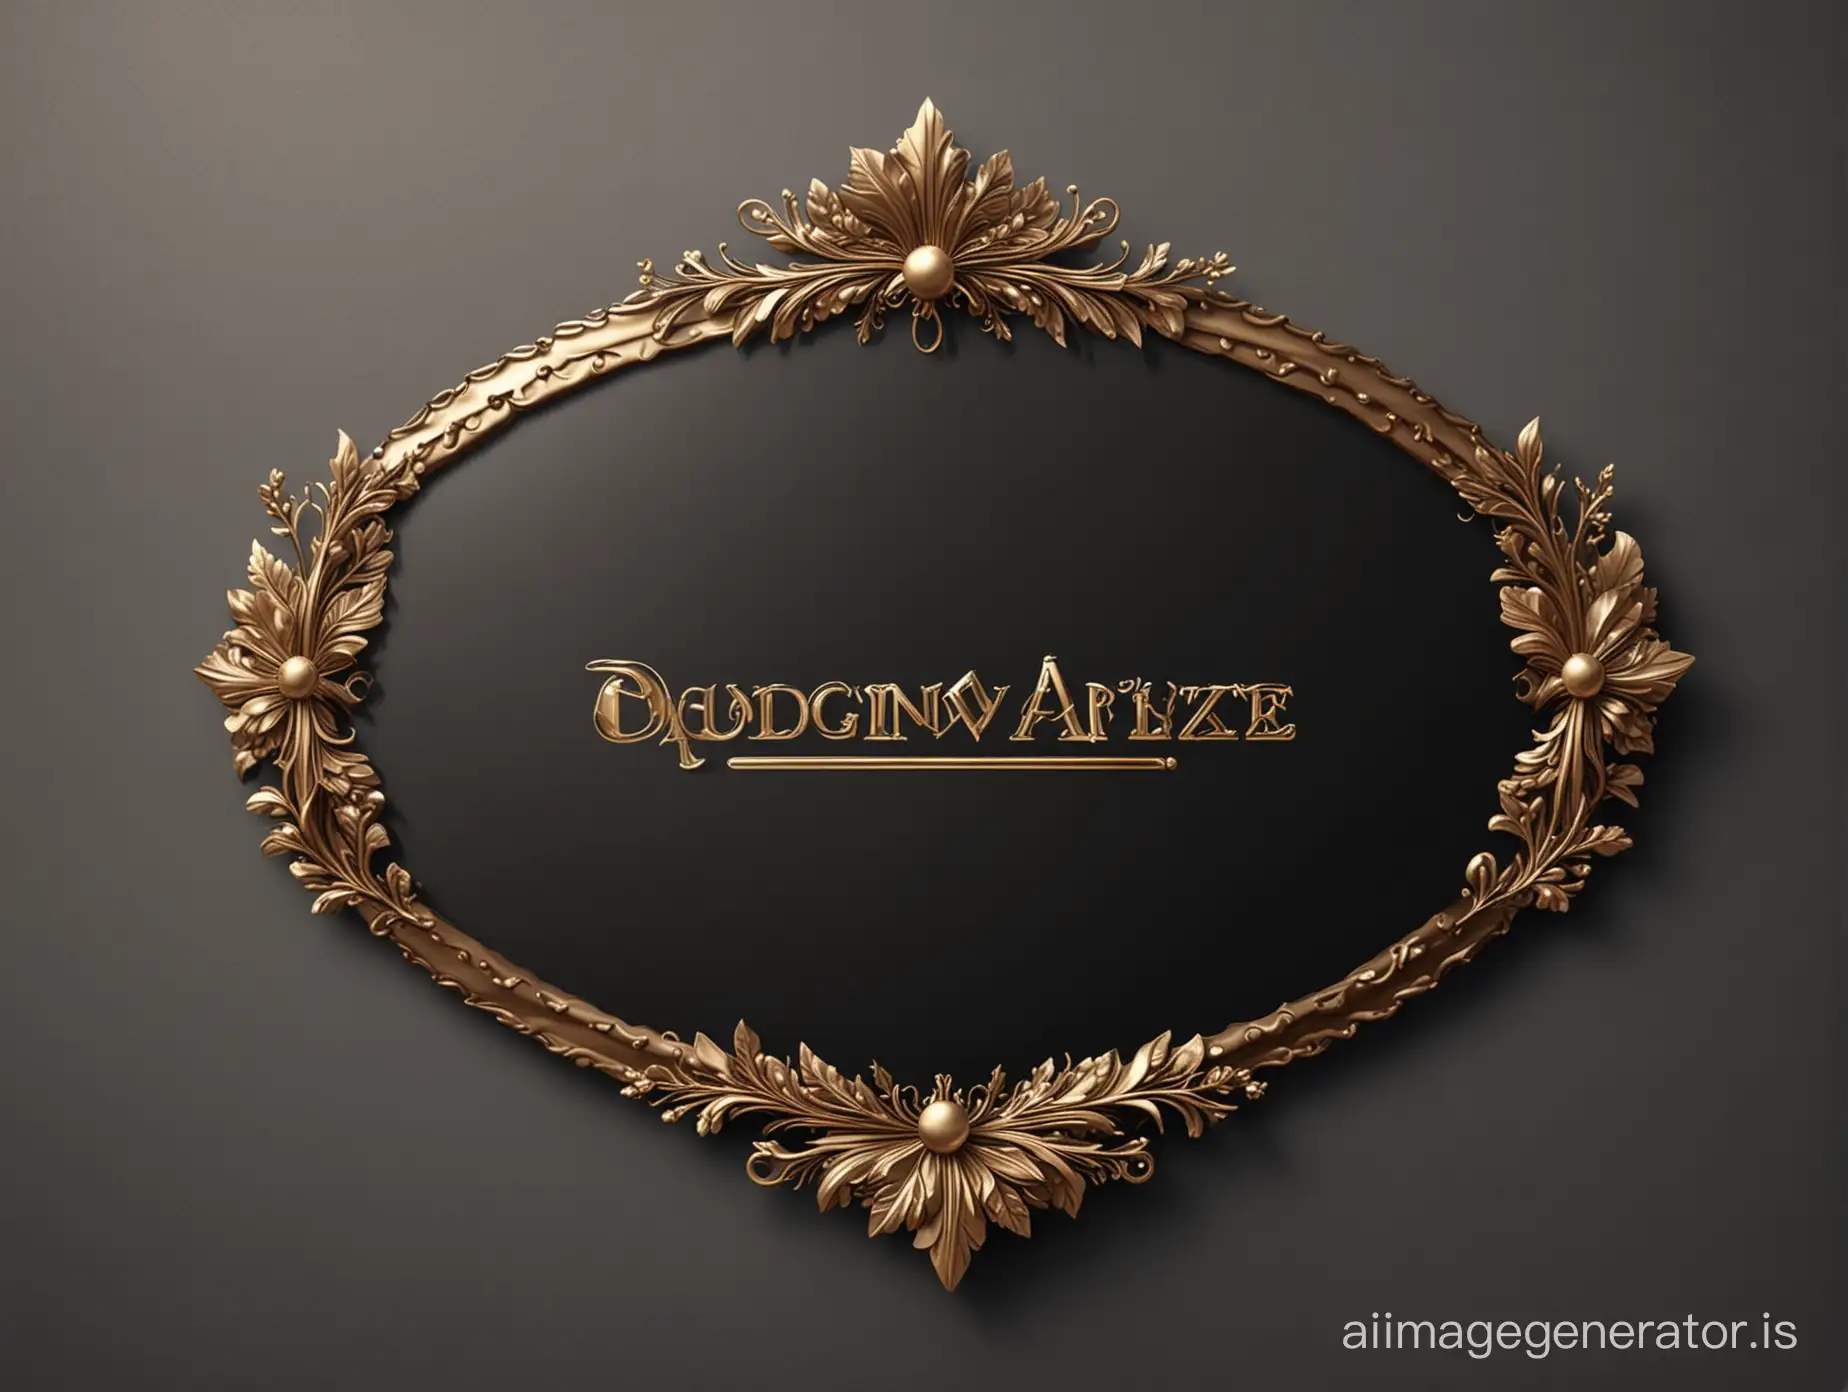 Plaque for text with a curved wreath, curved, bronze, gold, black plaque, fantasy realistic, HD, vector graphics, illustration